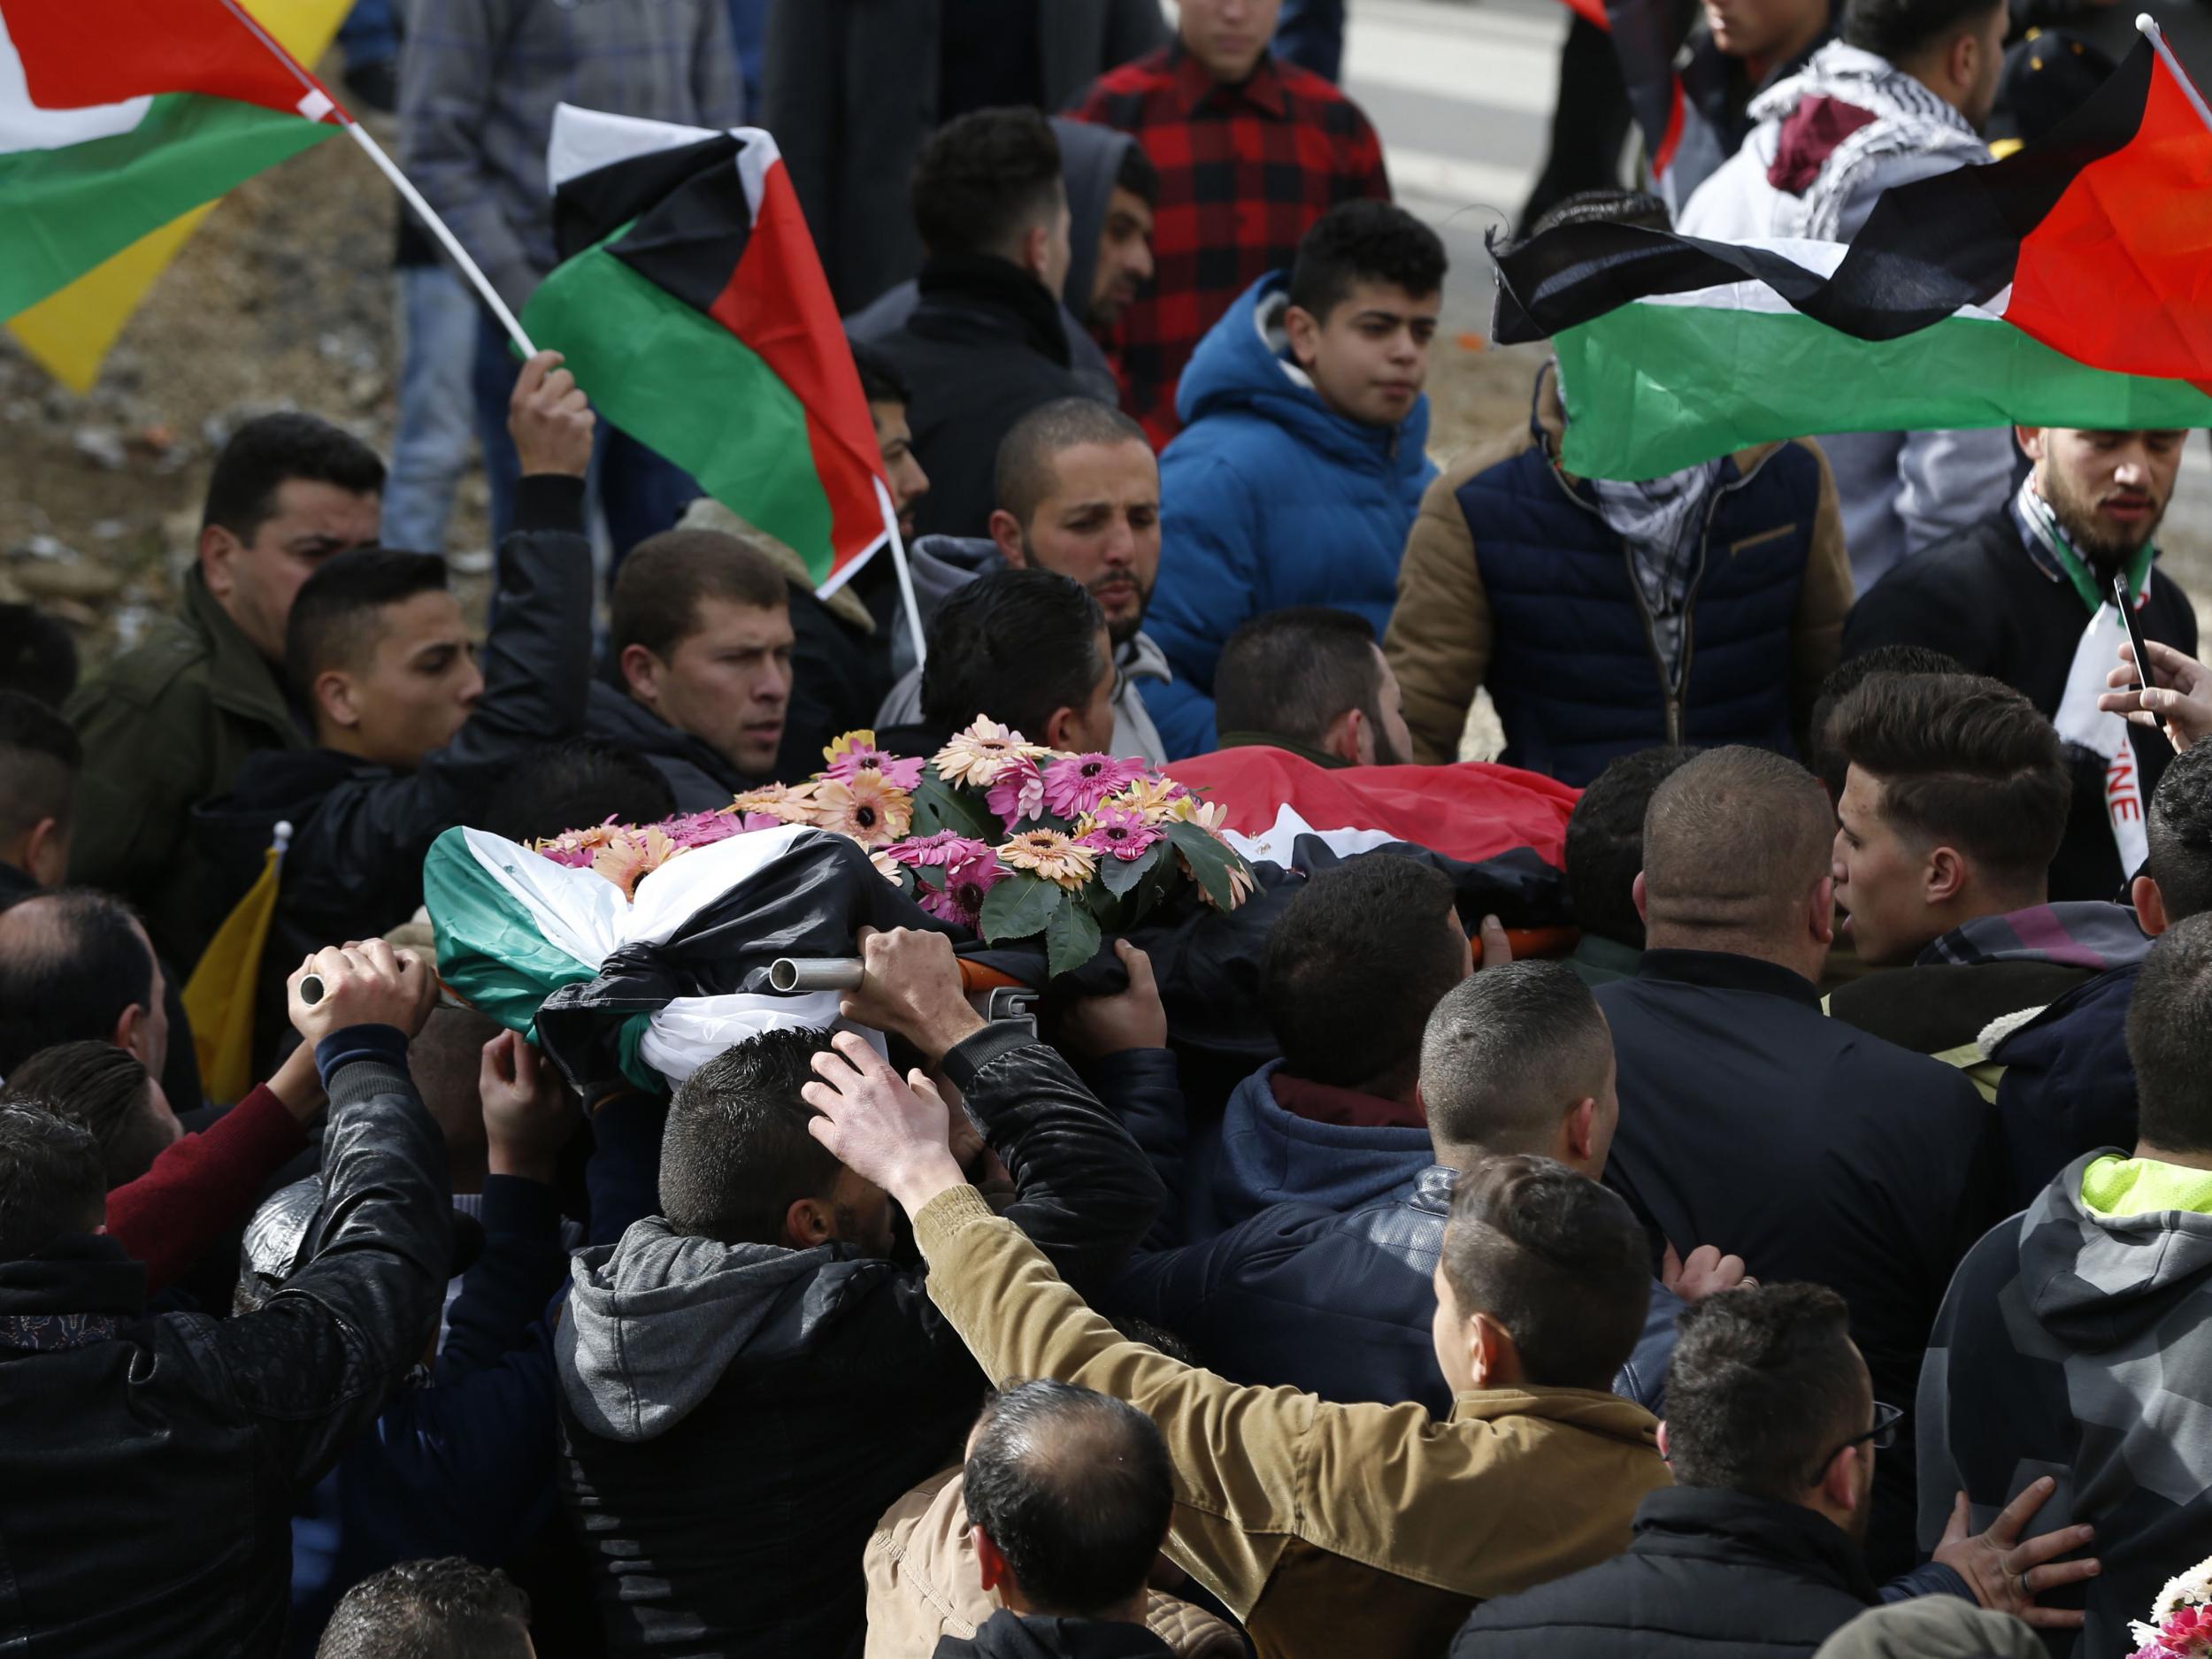 Palestinian mourners carry the body of Musab Firas al-Tamimi, 17, who was shot dead in clashes with the Israeli army a day earlier, during his funeral in the village of Deir Nizam north of Ramallah in the occupied West Bank, on 4 January 2018